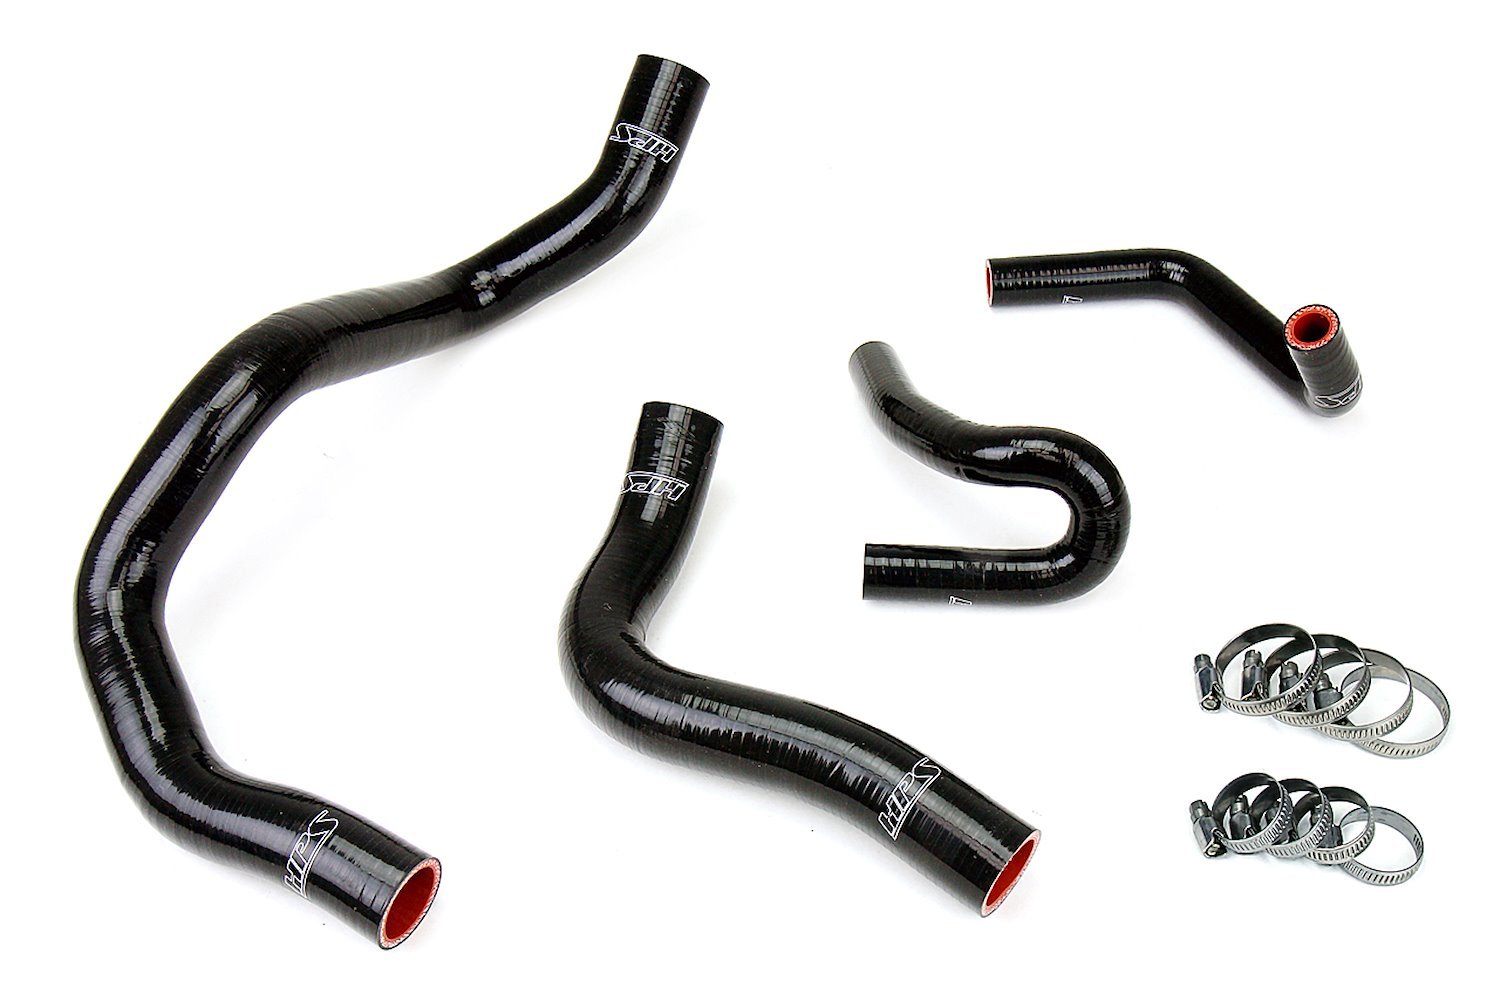 57-1413-BLK Coolant Hose Kit, High-Temp 3-Ply Reinforced Silicone, Replace Rubber Radiator Heater Coolant Hoses